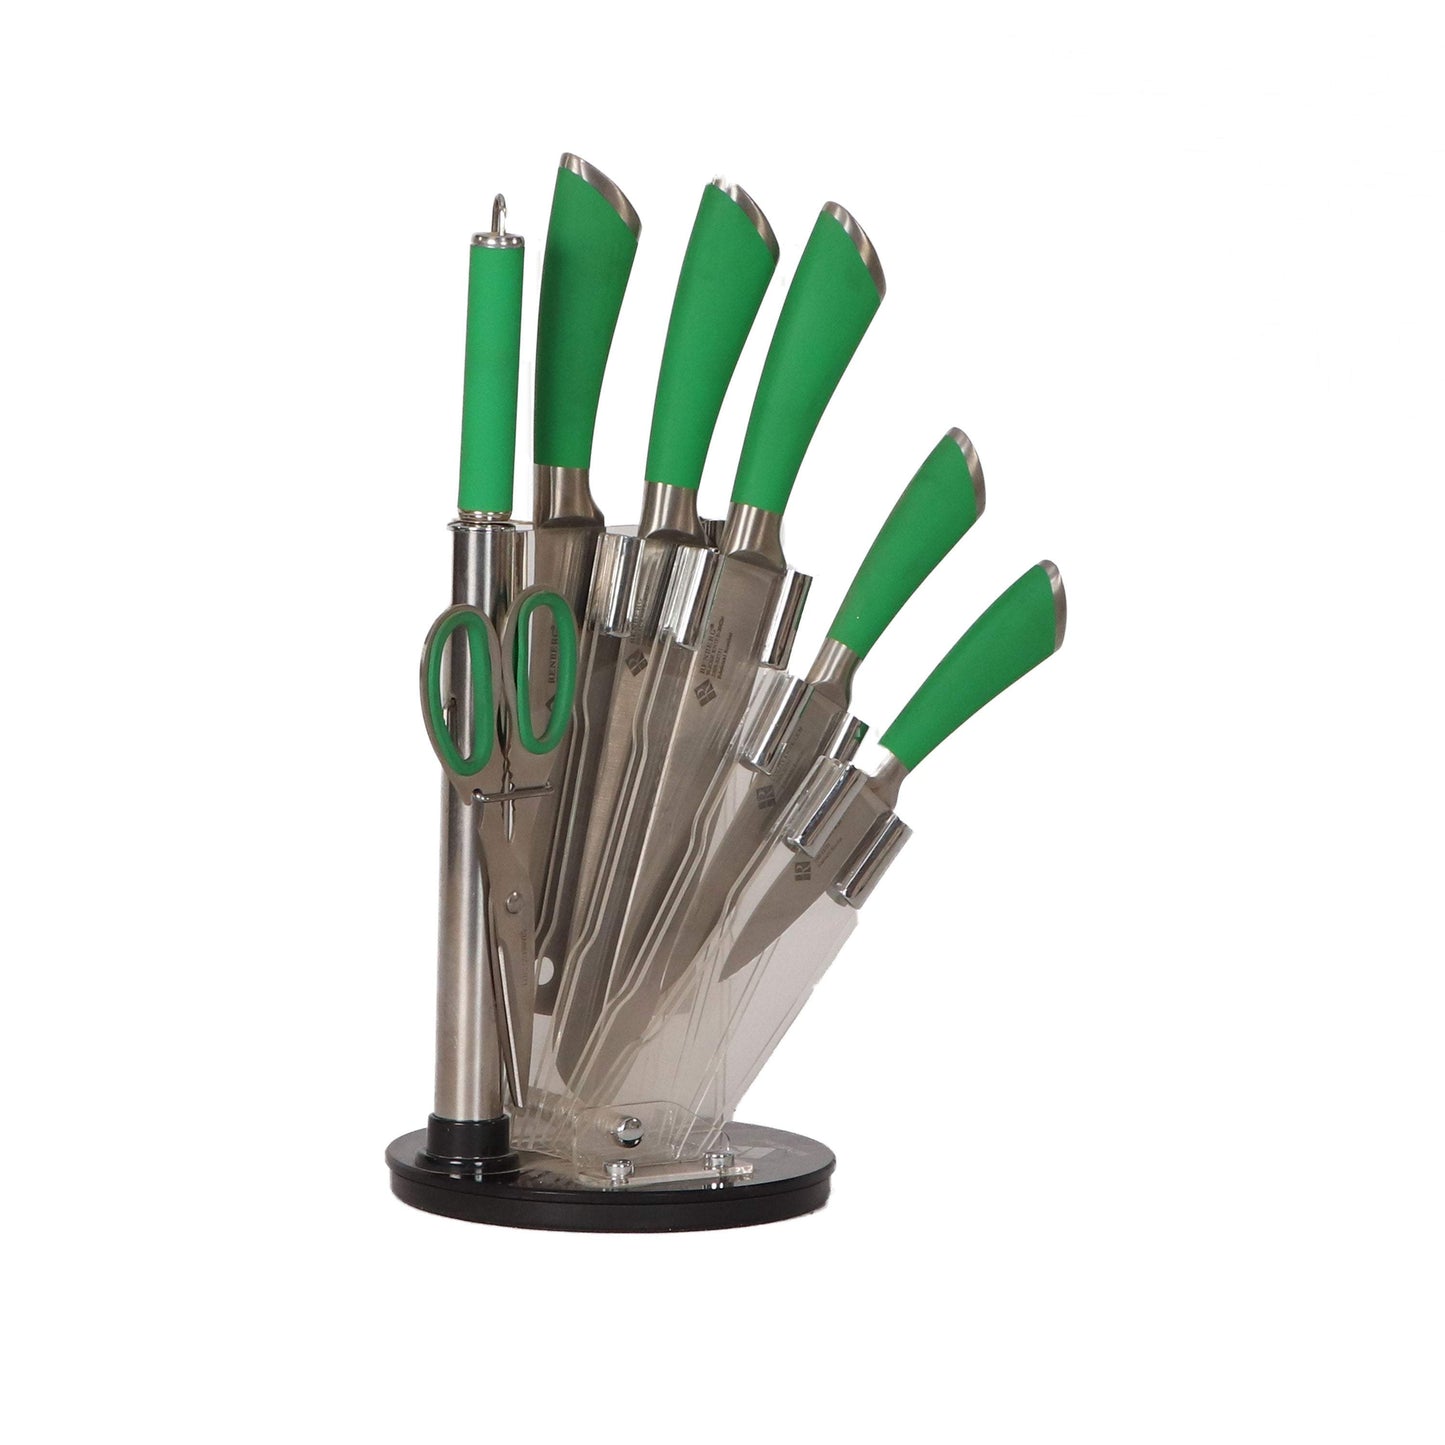 Renberg 8 Piece Knife Block Set With Green Coloured Knife Block-Royal Brands Co-